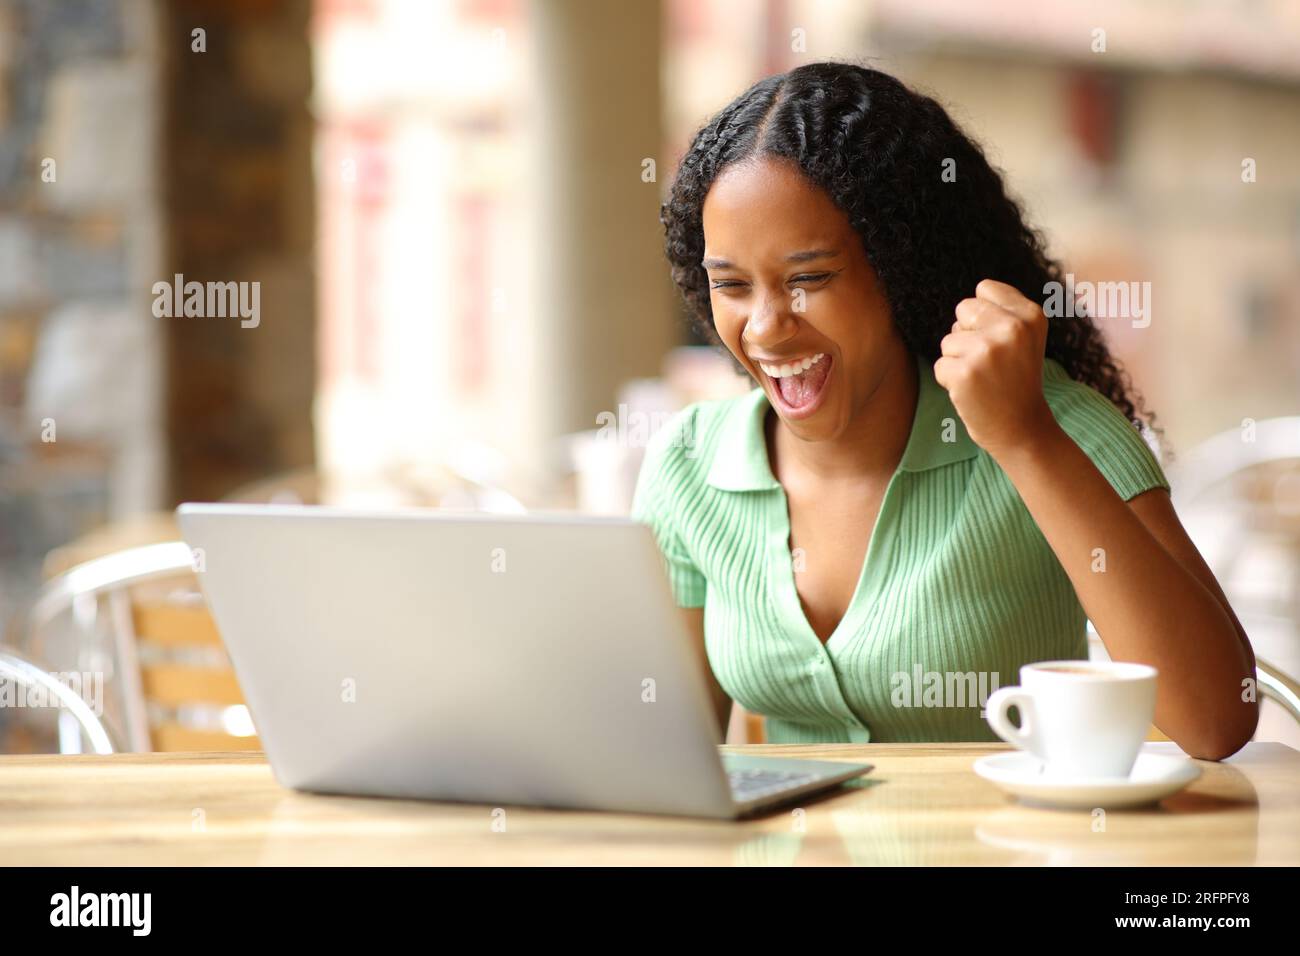 Excited black woman checking good news on laptop in a bar terrace Stock Photo